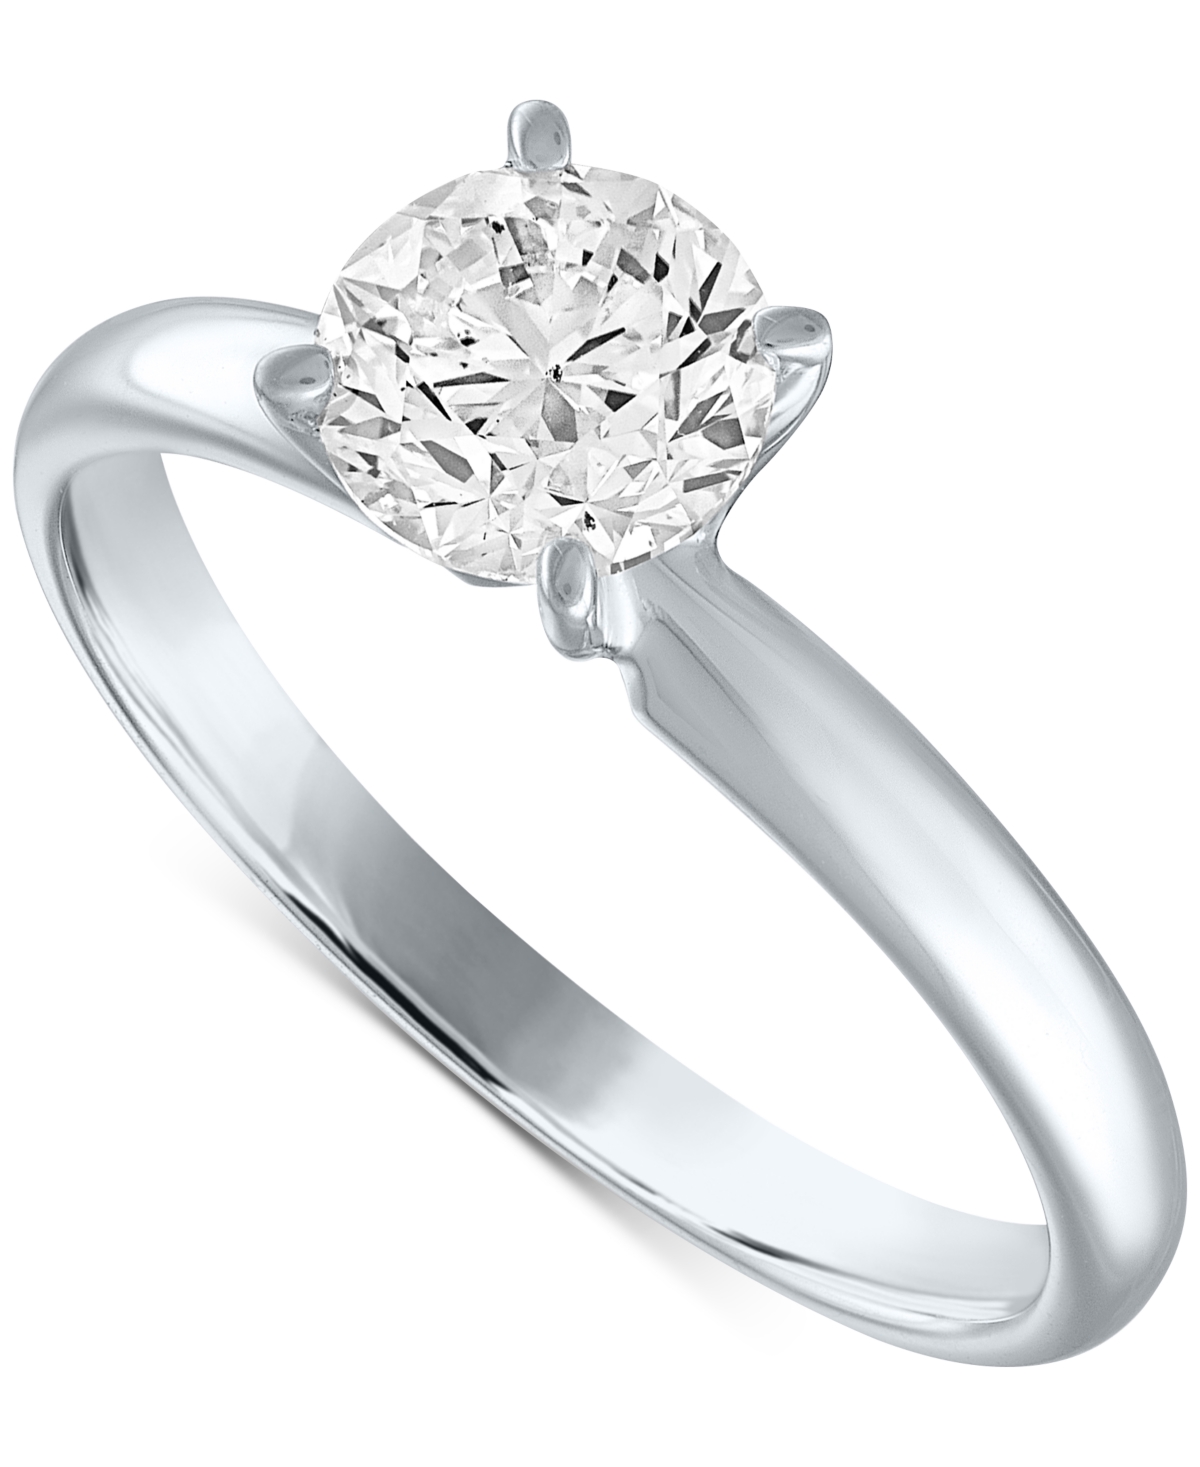 Gia Certified Diamonds Gia Certified Diamond Engagement Ring (1 ct. t.w.) in 14k White Gold